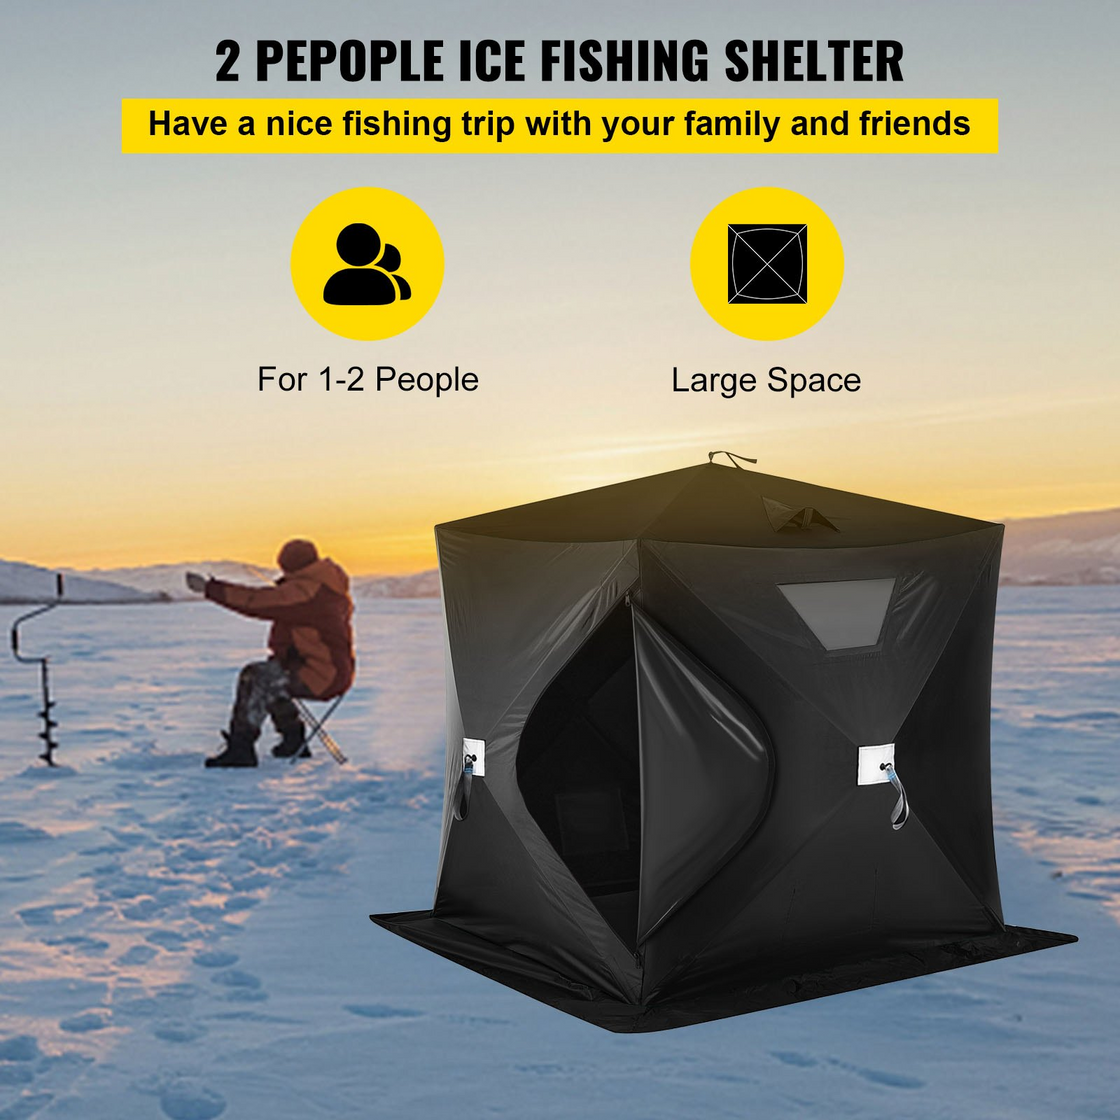 VEVOR 2-3 Person Ice Fishing Shelter, Pop-Up Portable Insulated Ice Fishing Tent, Waterproof Oxford Fabric